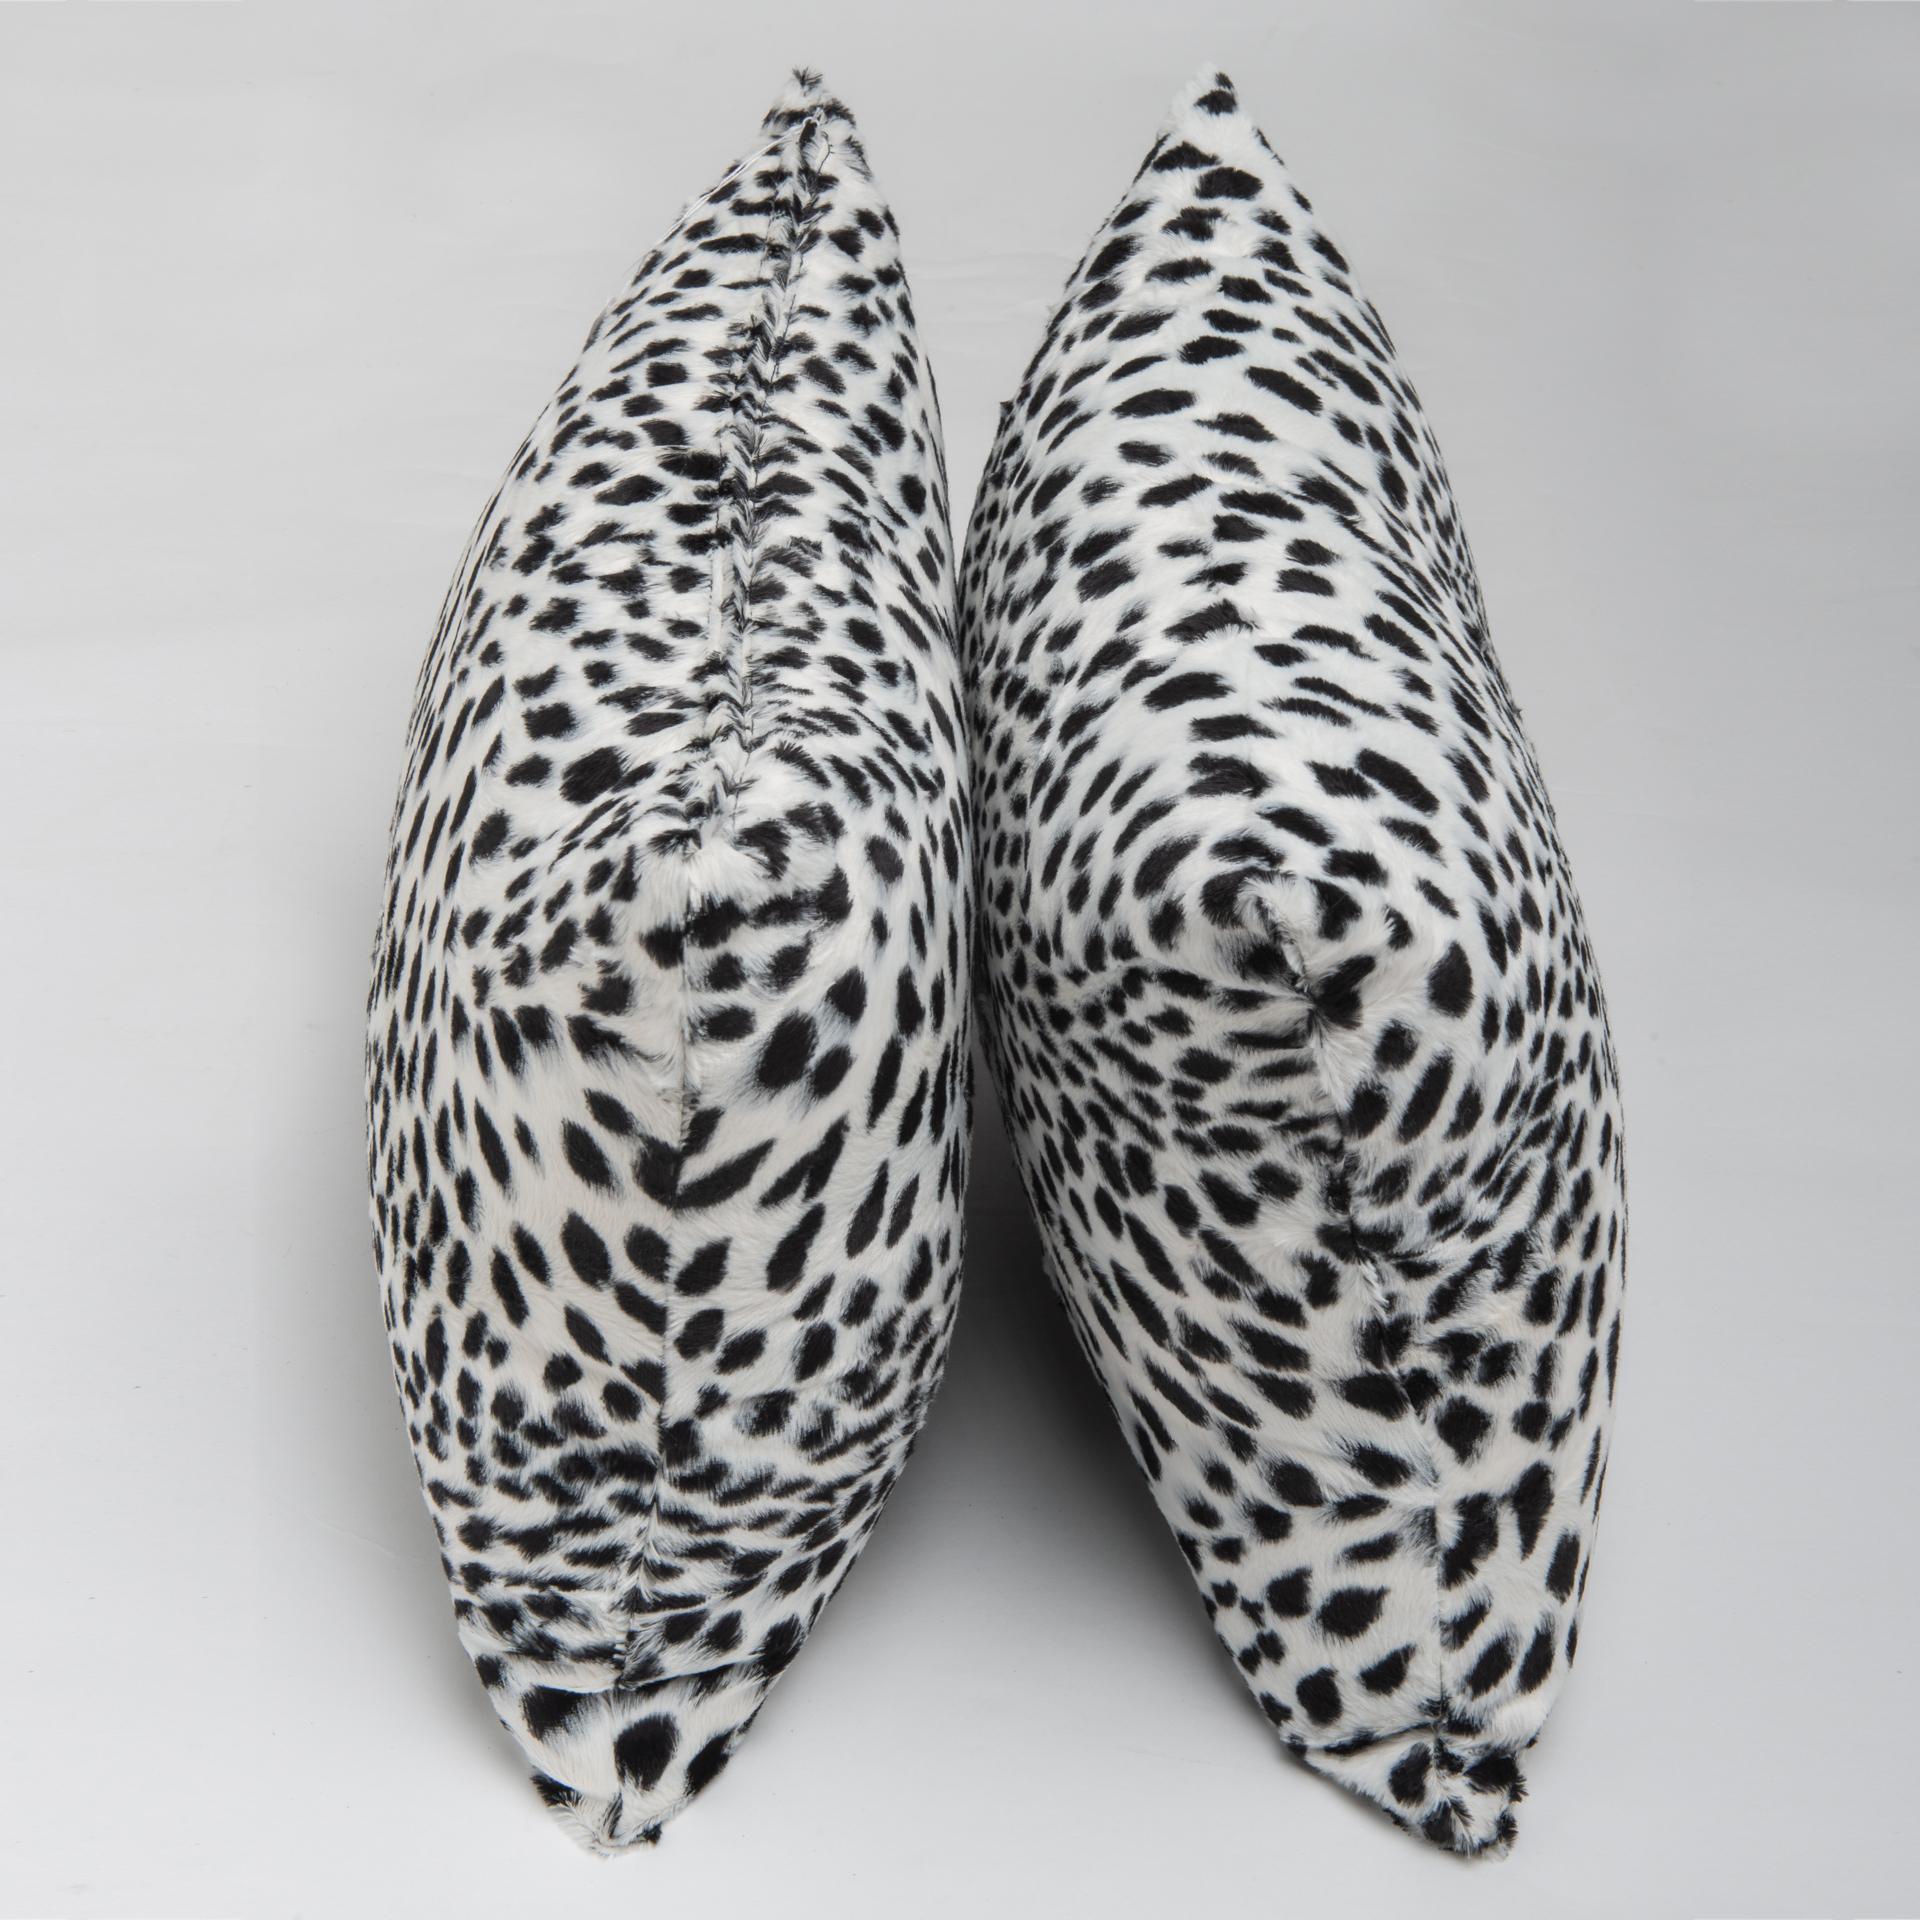 B/2441 - Pair of pillows in black and white dalmatian fabric . Have You a place to put them ?.